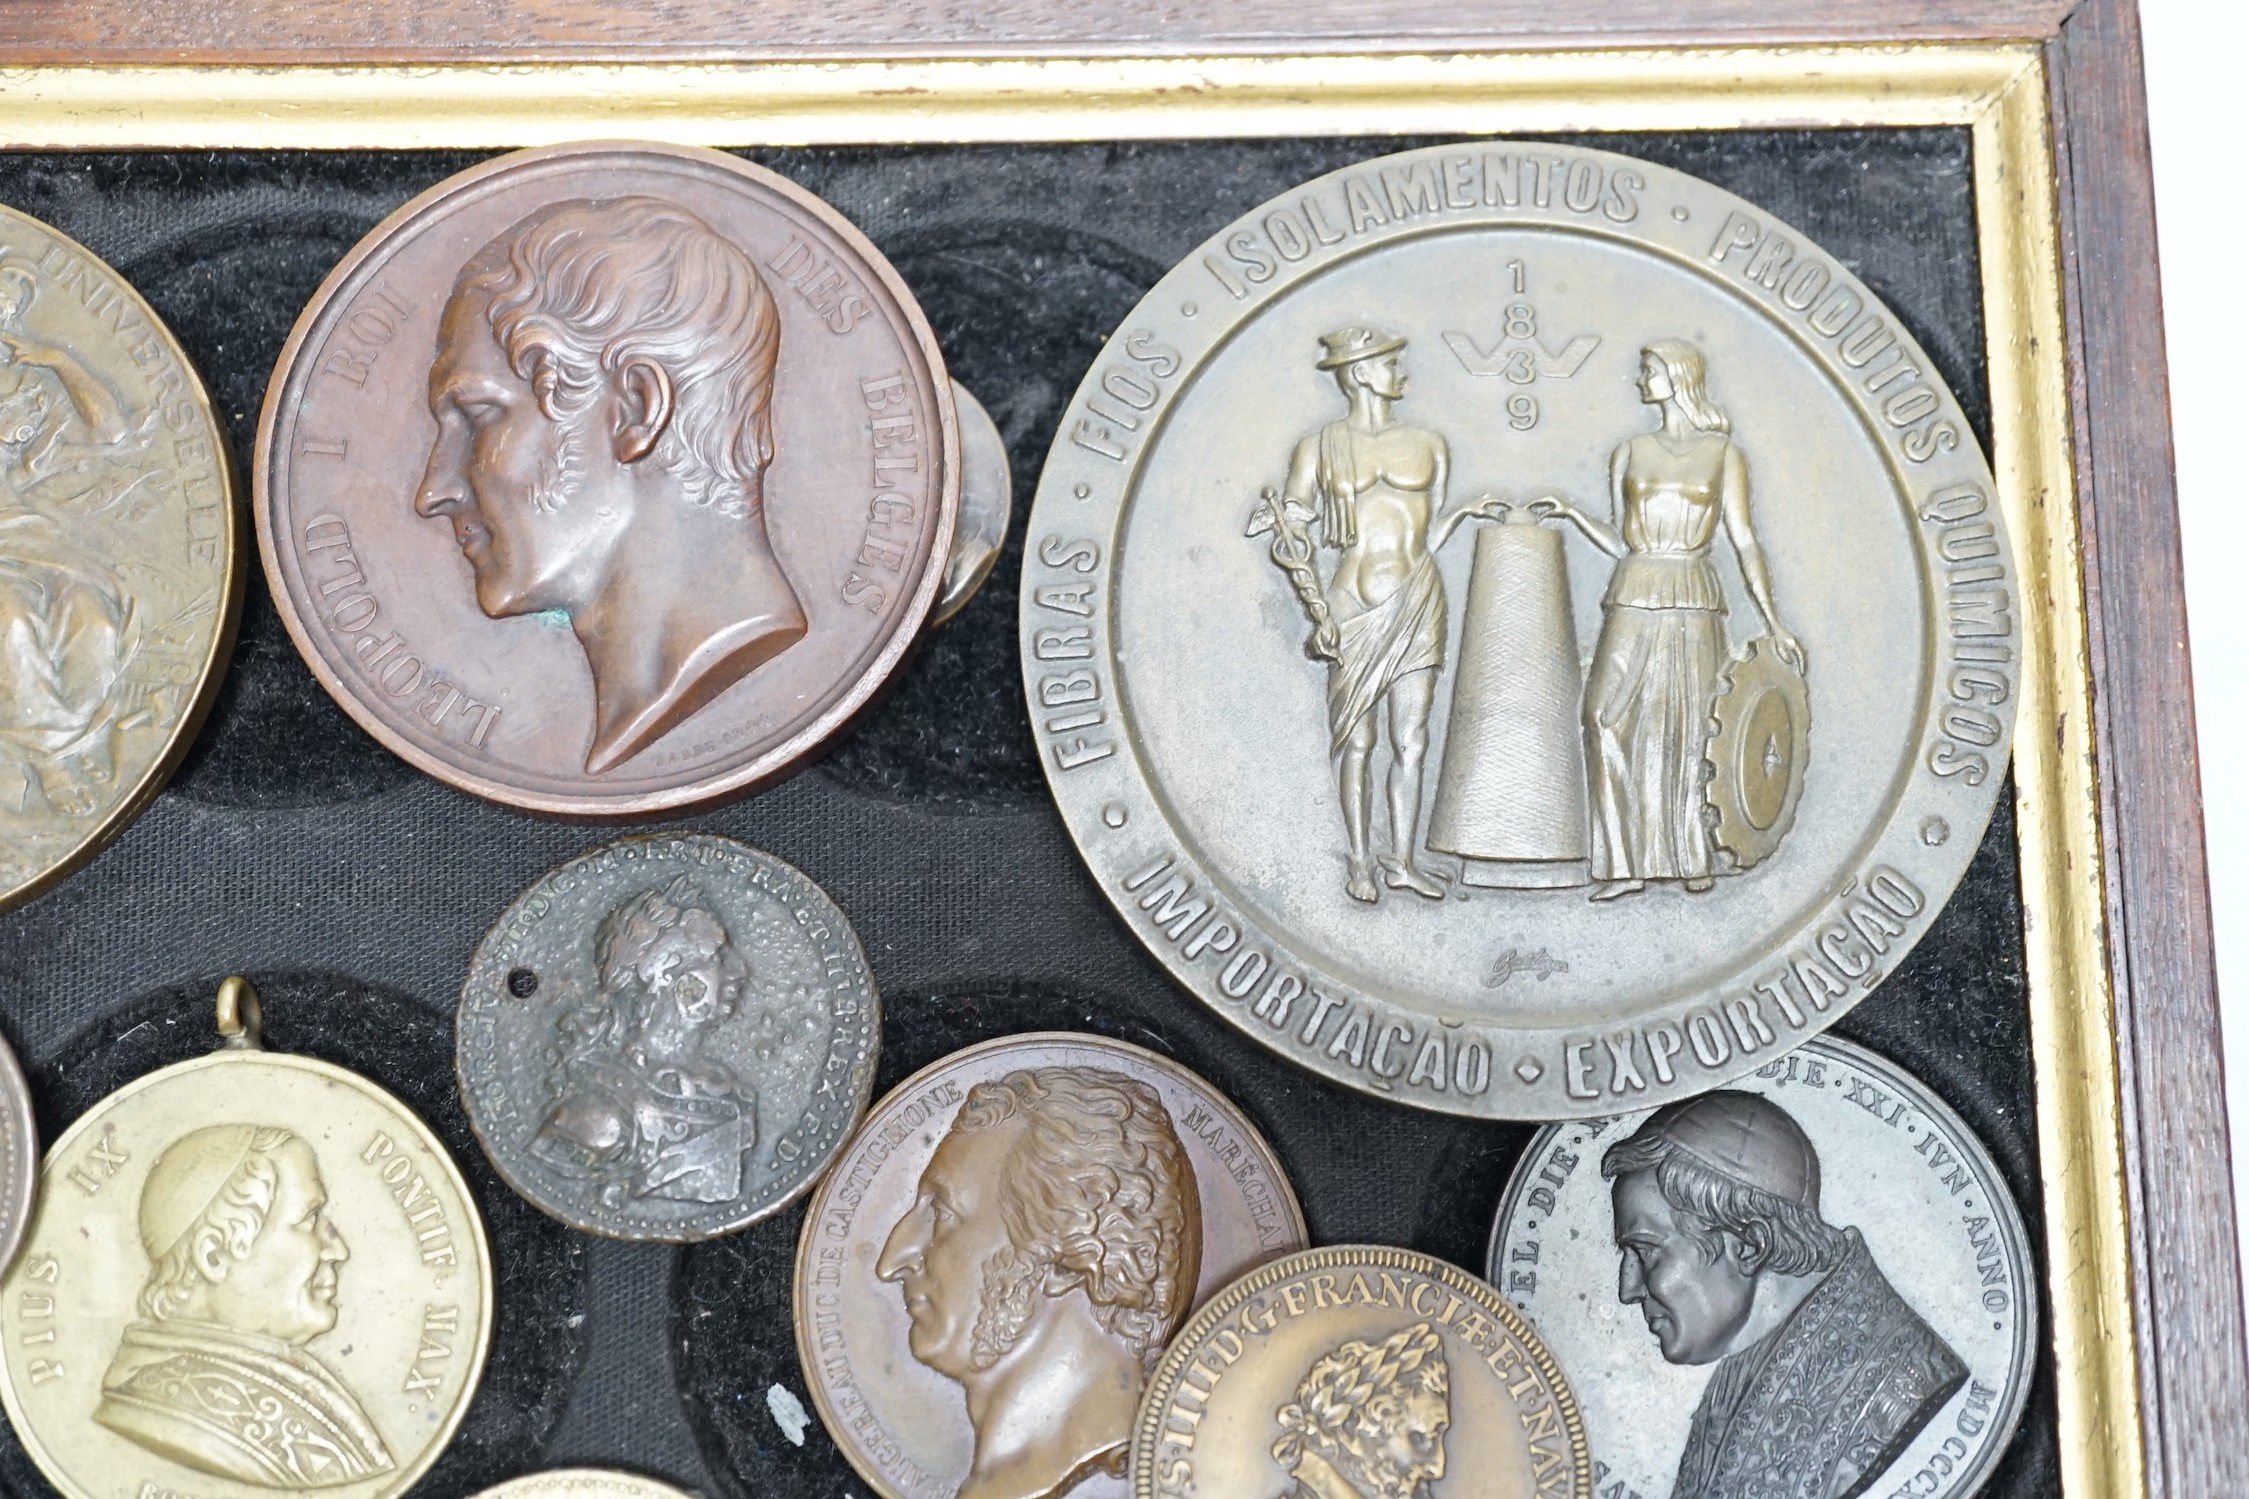 Foreign commemorative medals, 18th to 20th century –